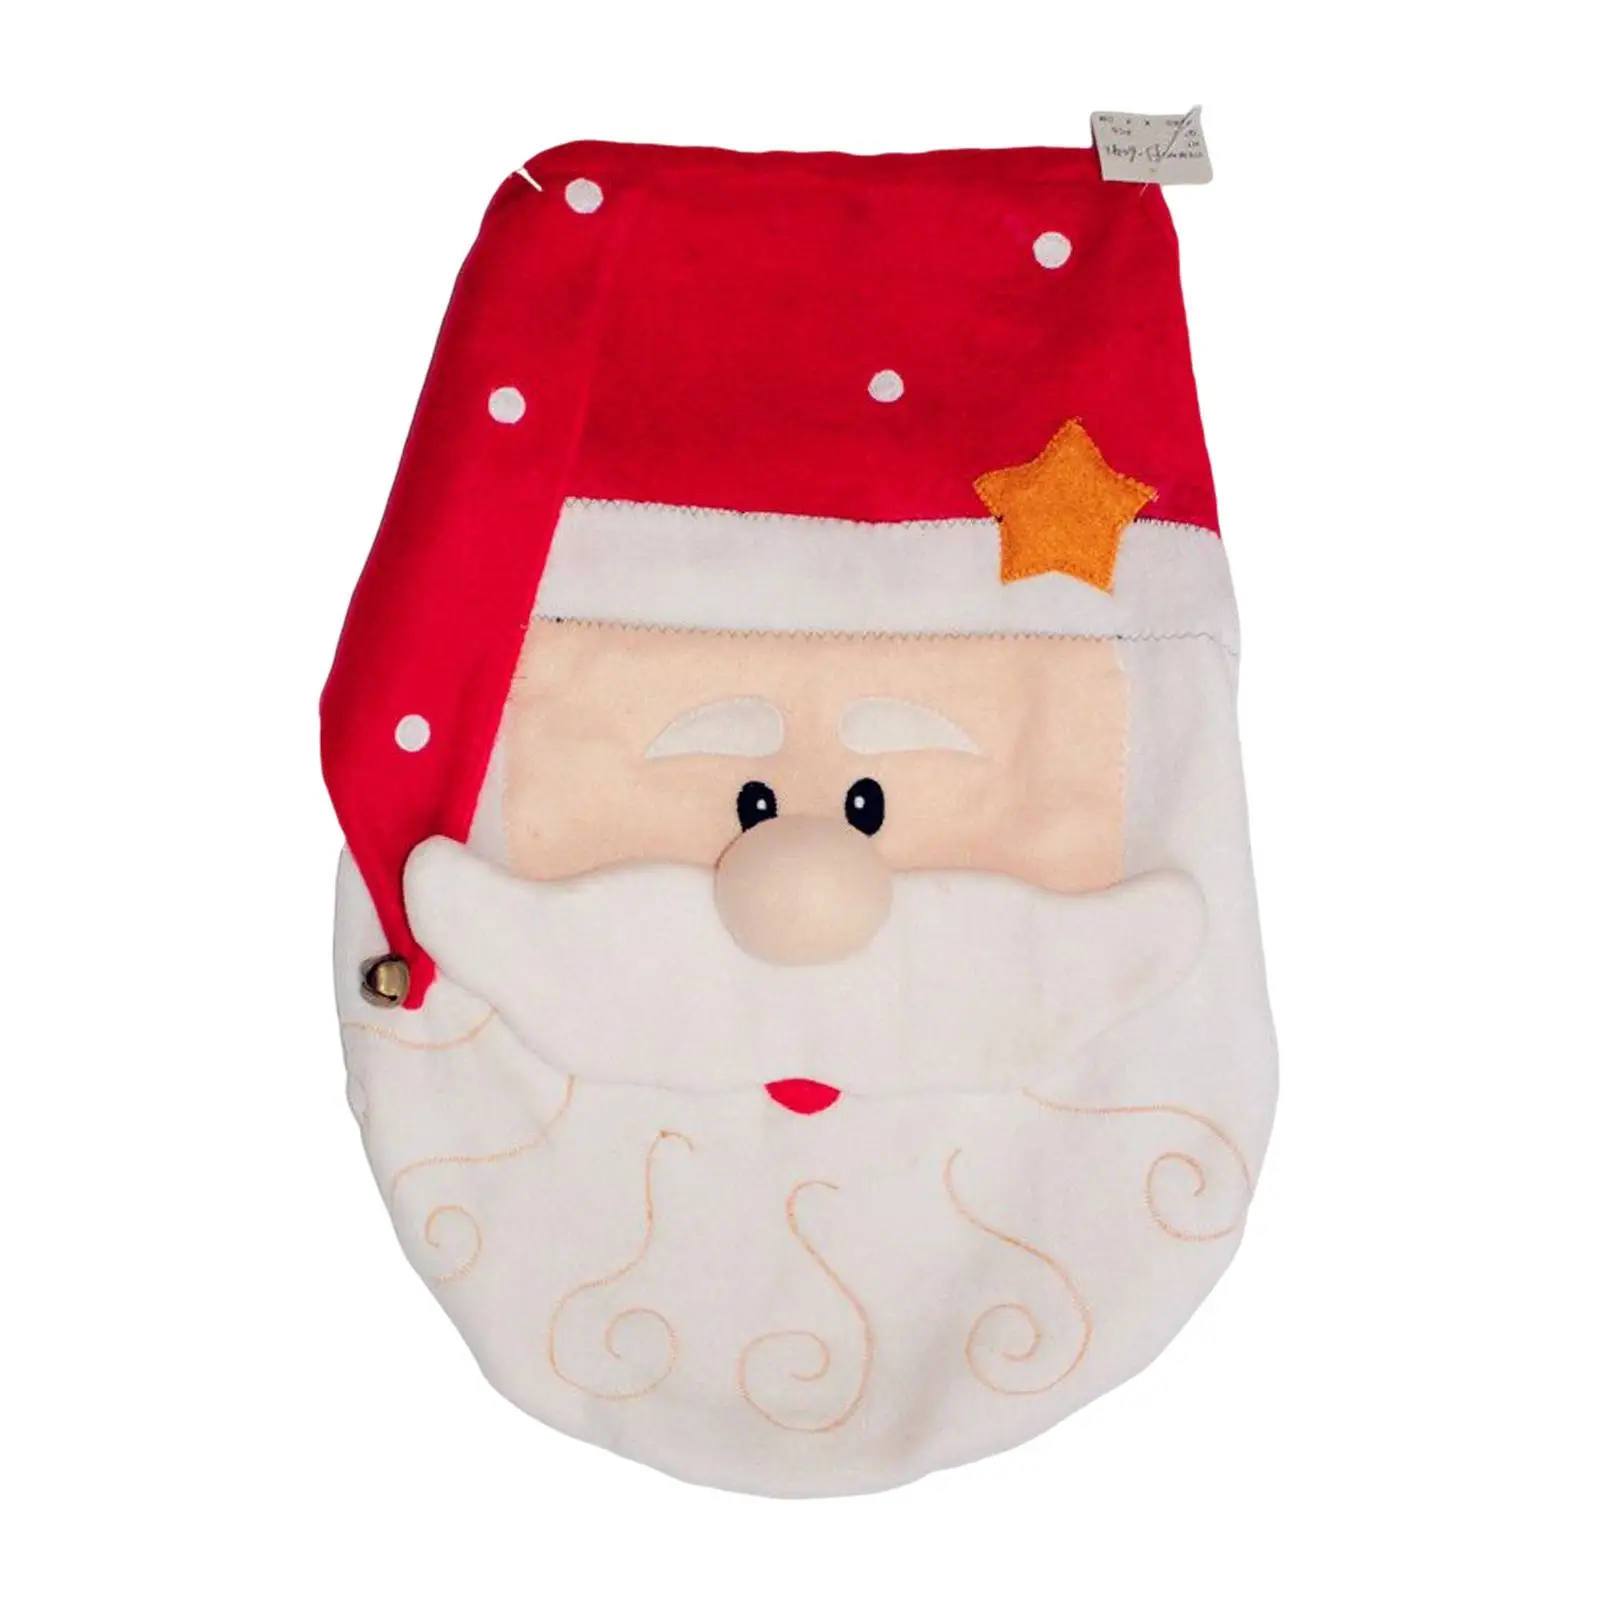 Fancy Toilet Seat Cover, Christmas, Supplies, Lid Cover, for Xmas Bathroom Decor